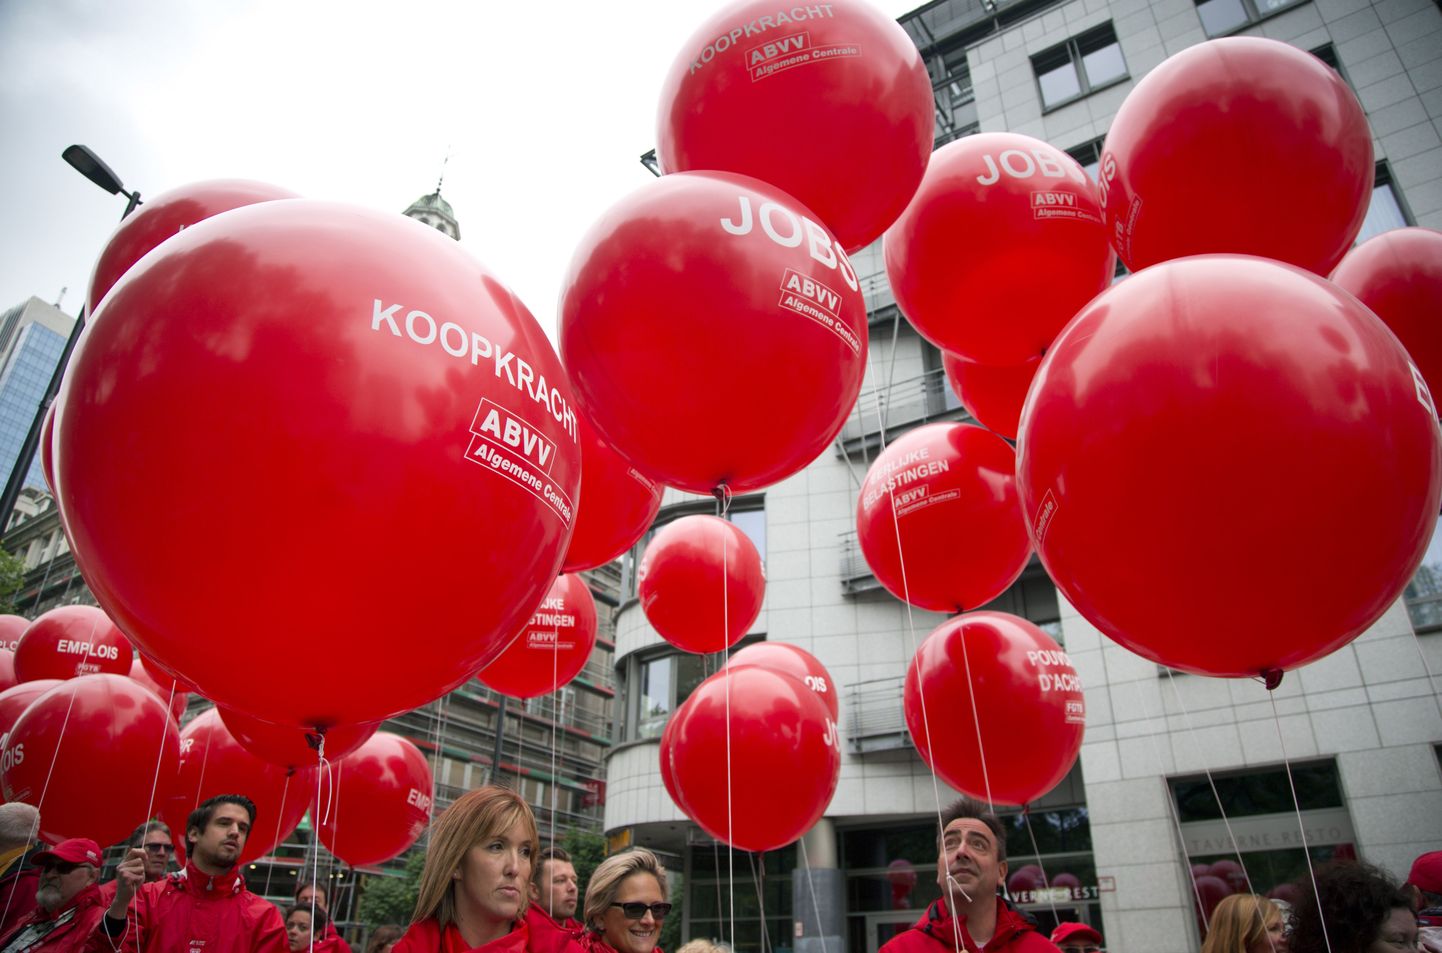 Union members hold balloons which read 'Jobs' and 'Purchasing power' during a demonstration in Brussels on Tuesday, May 24, 2016. Tens of thousands of demonstrators marched through the center of the capital to protest the center-right government